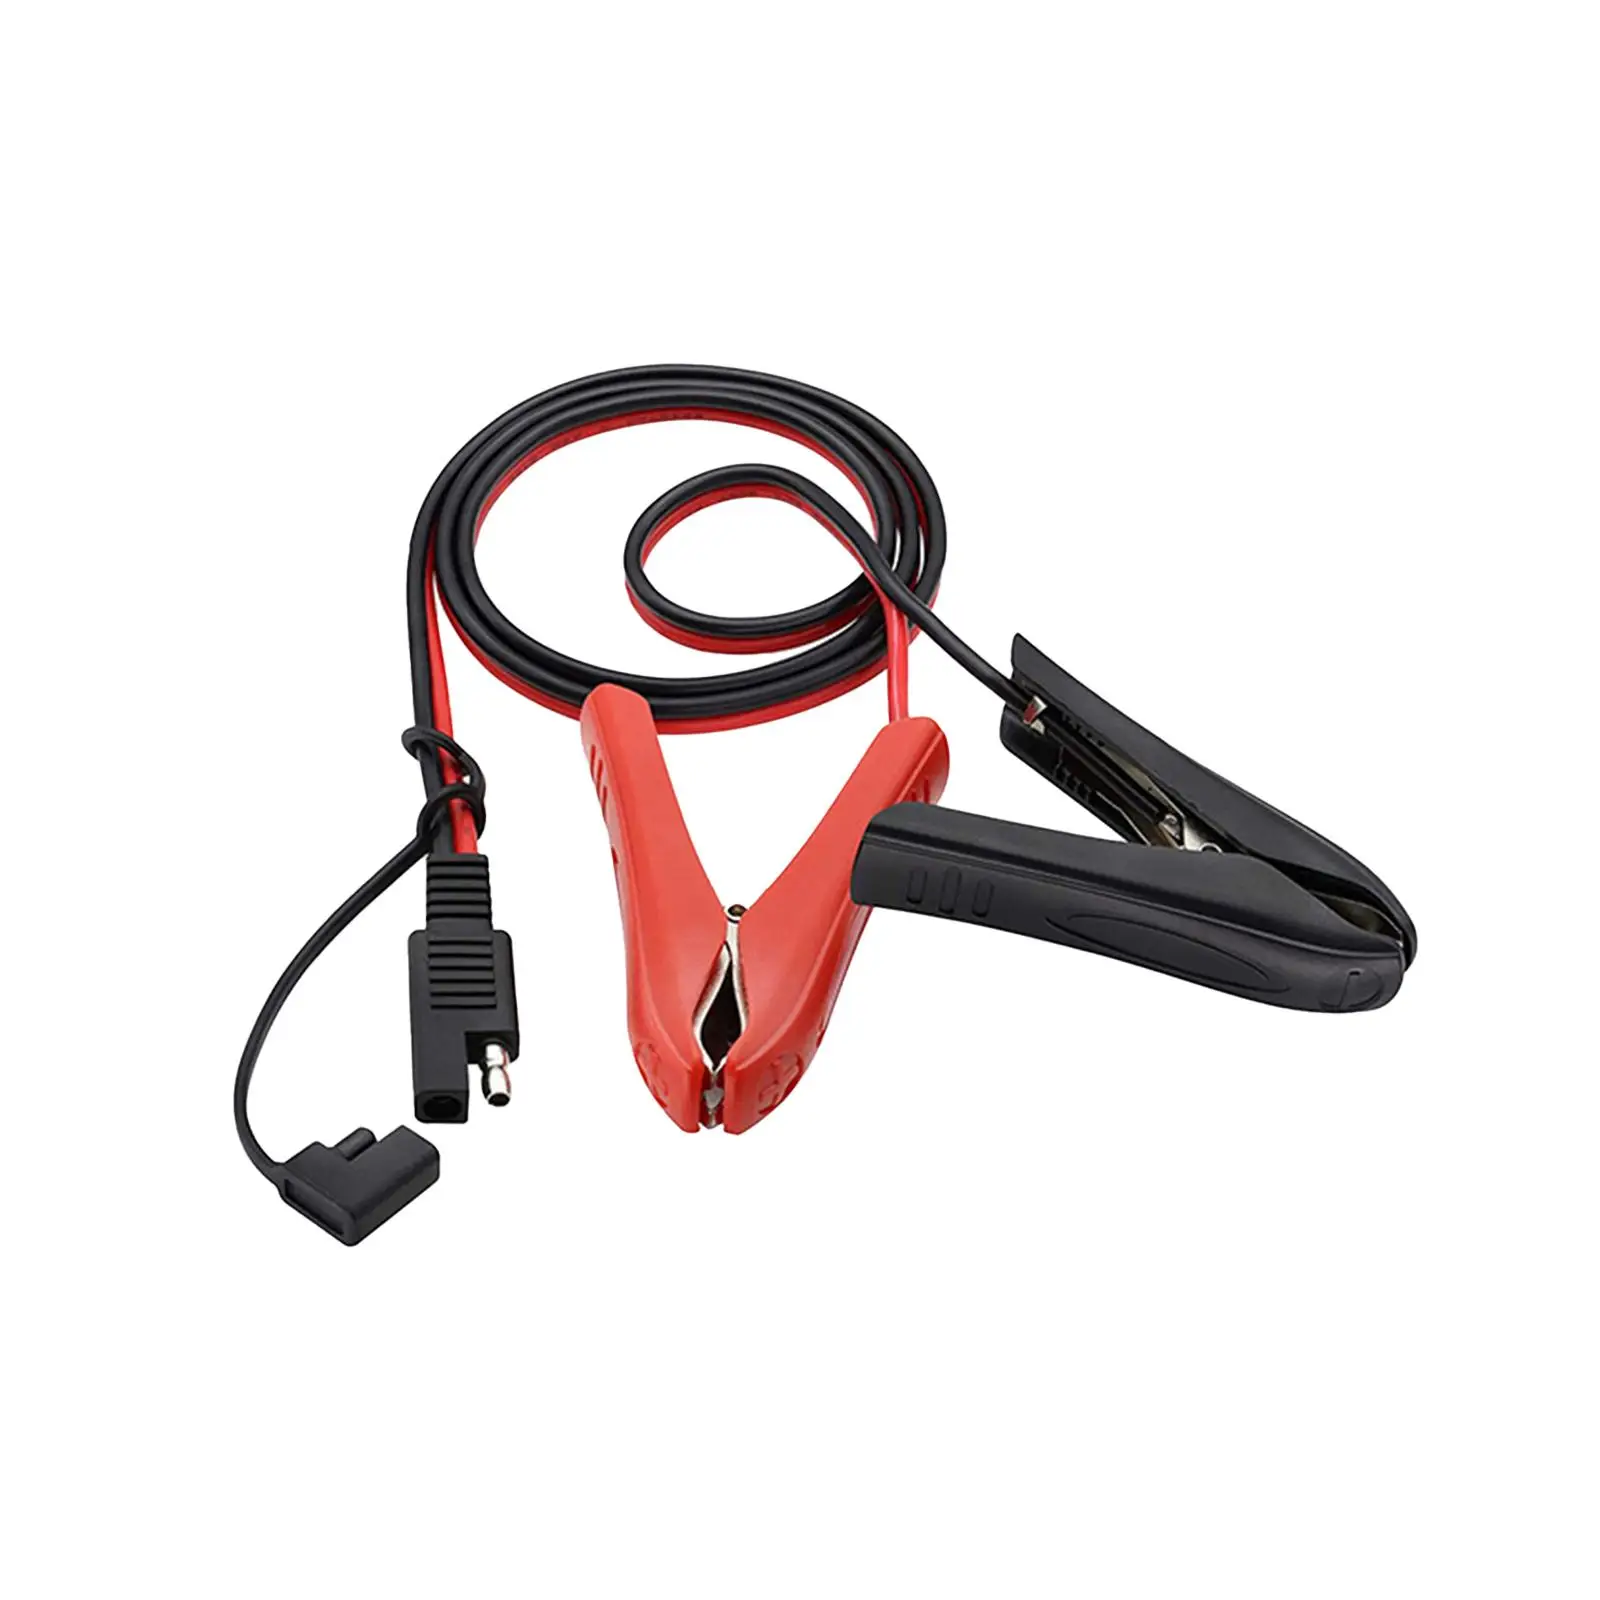 SAE to Alligator Clip Power Cord Quick Disconnect for Vehicle Motorbike